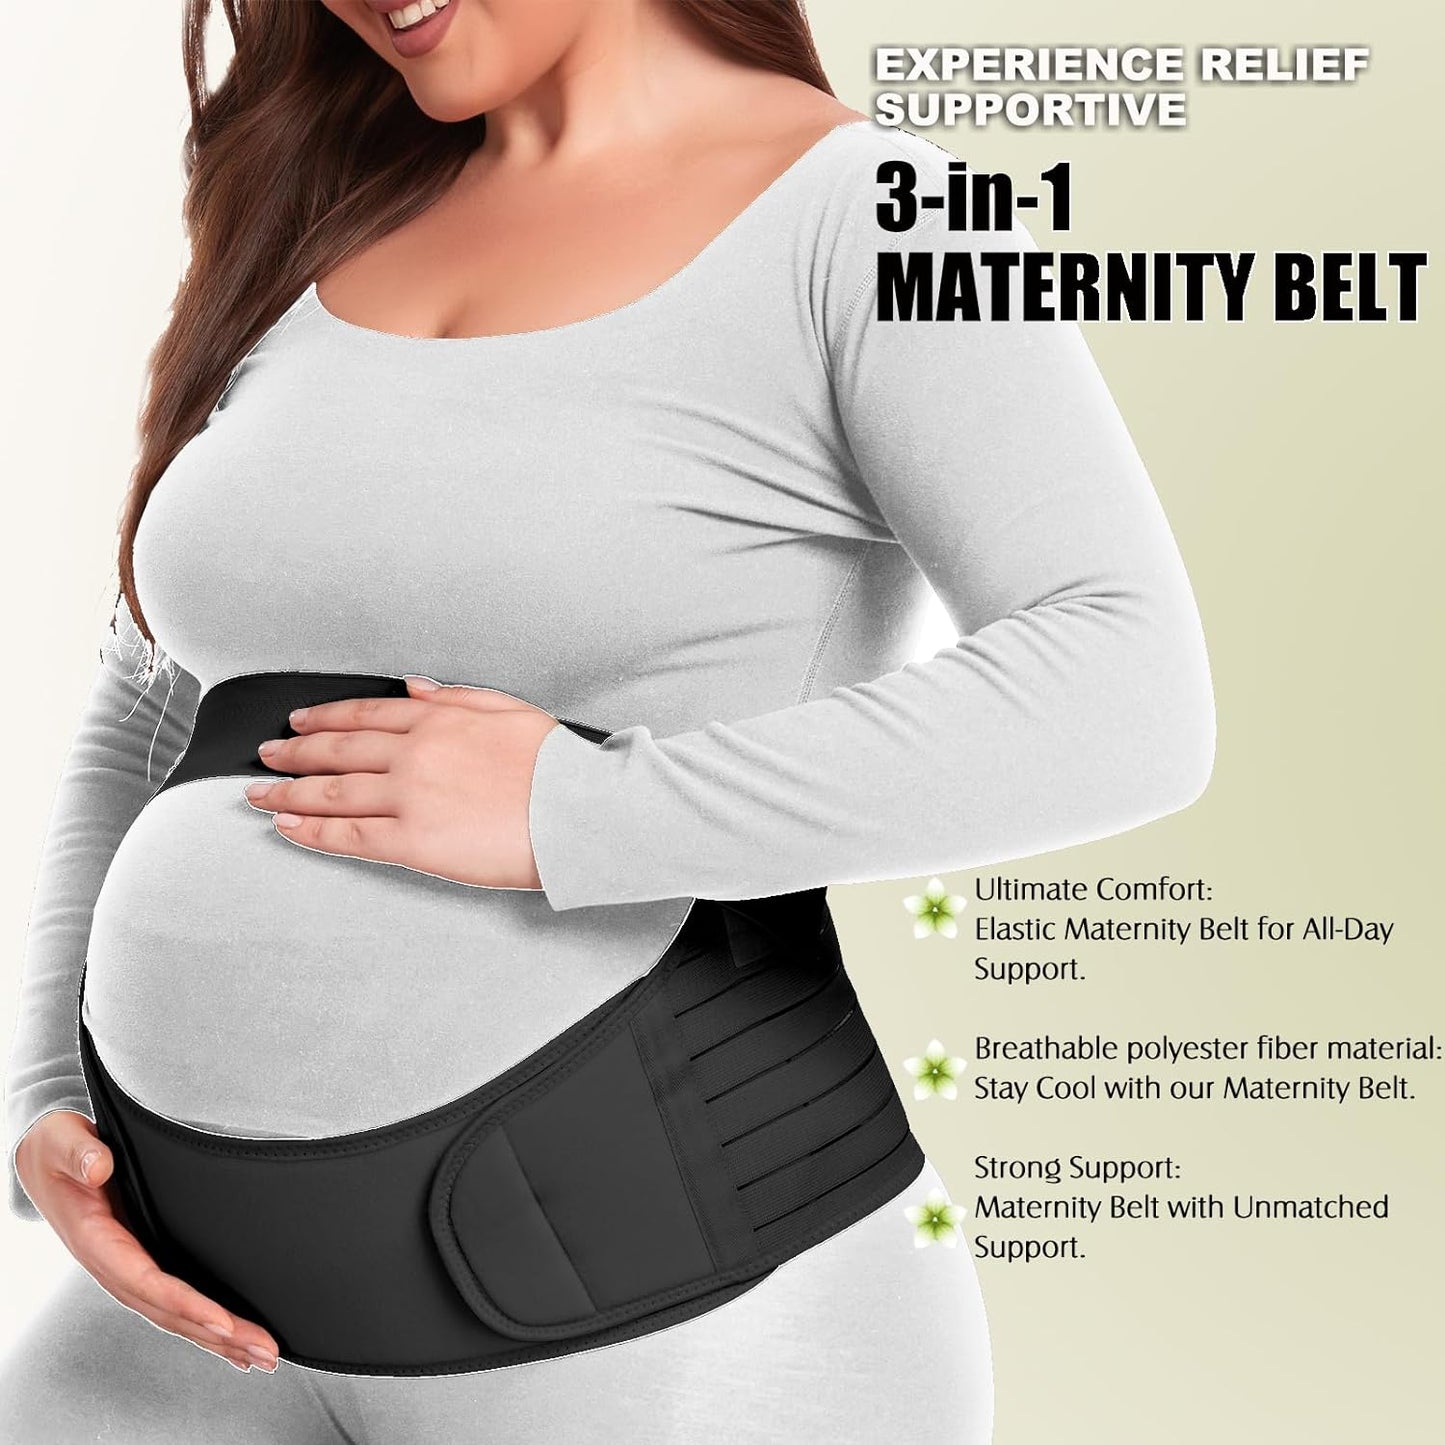 Pregnancy Belly Support Band Maternity Belt Back Support Belly Bands for Pregnant Women Lightweight Belly Band Back Brace Pregnancy Belly Support Pregnancy Must Haves for Pregnant Women,Black,Medium